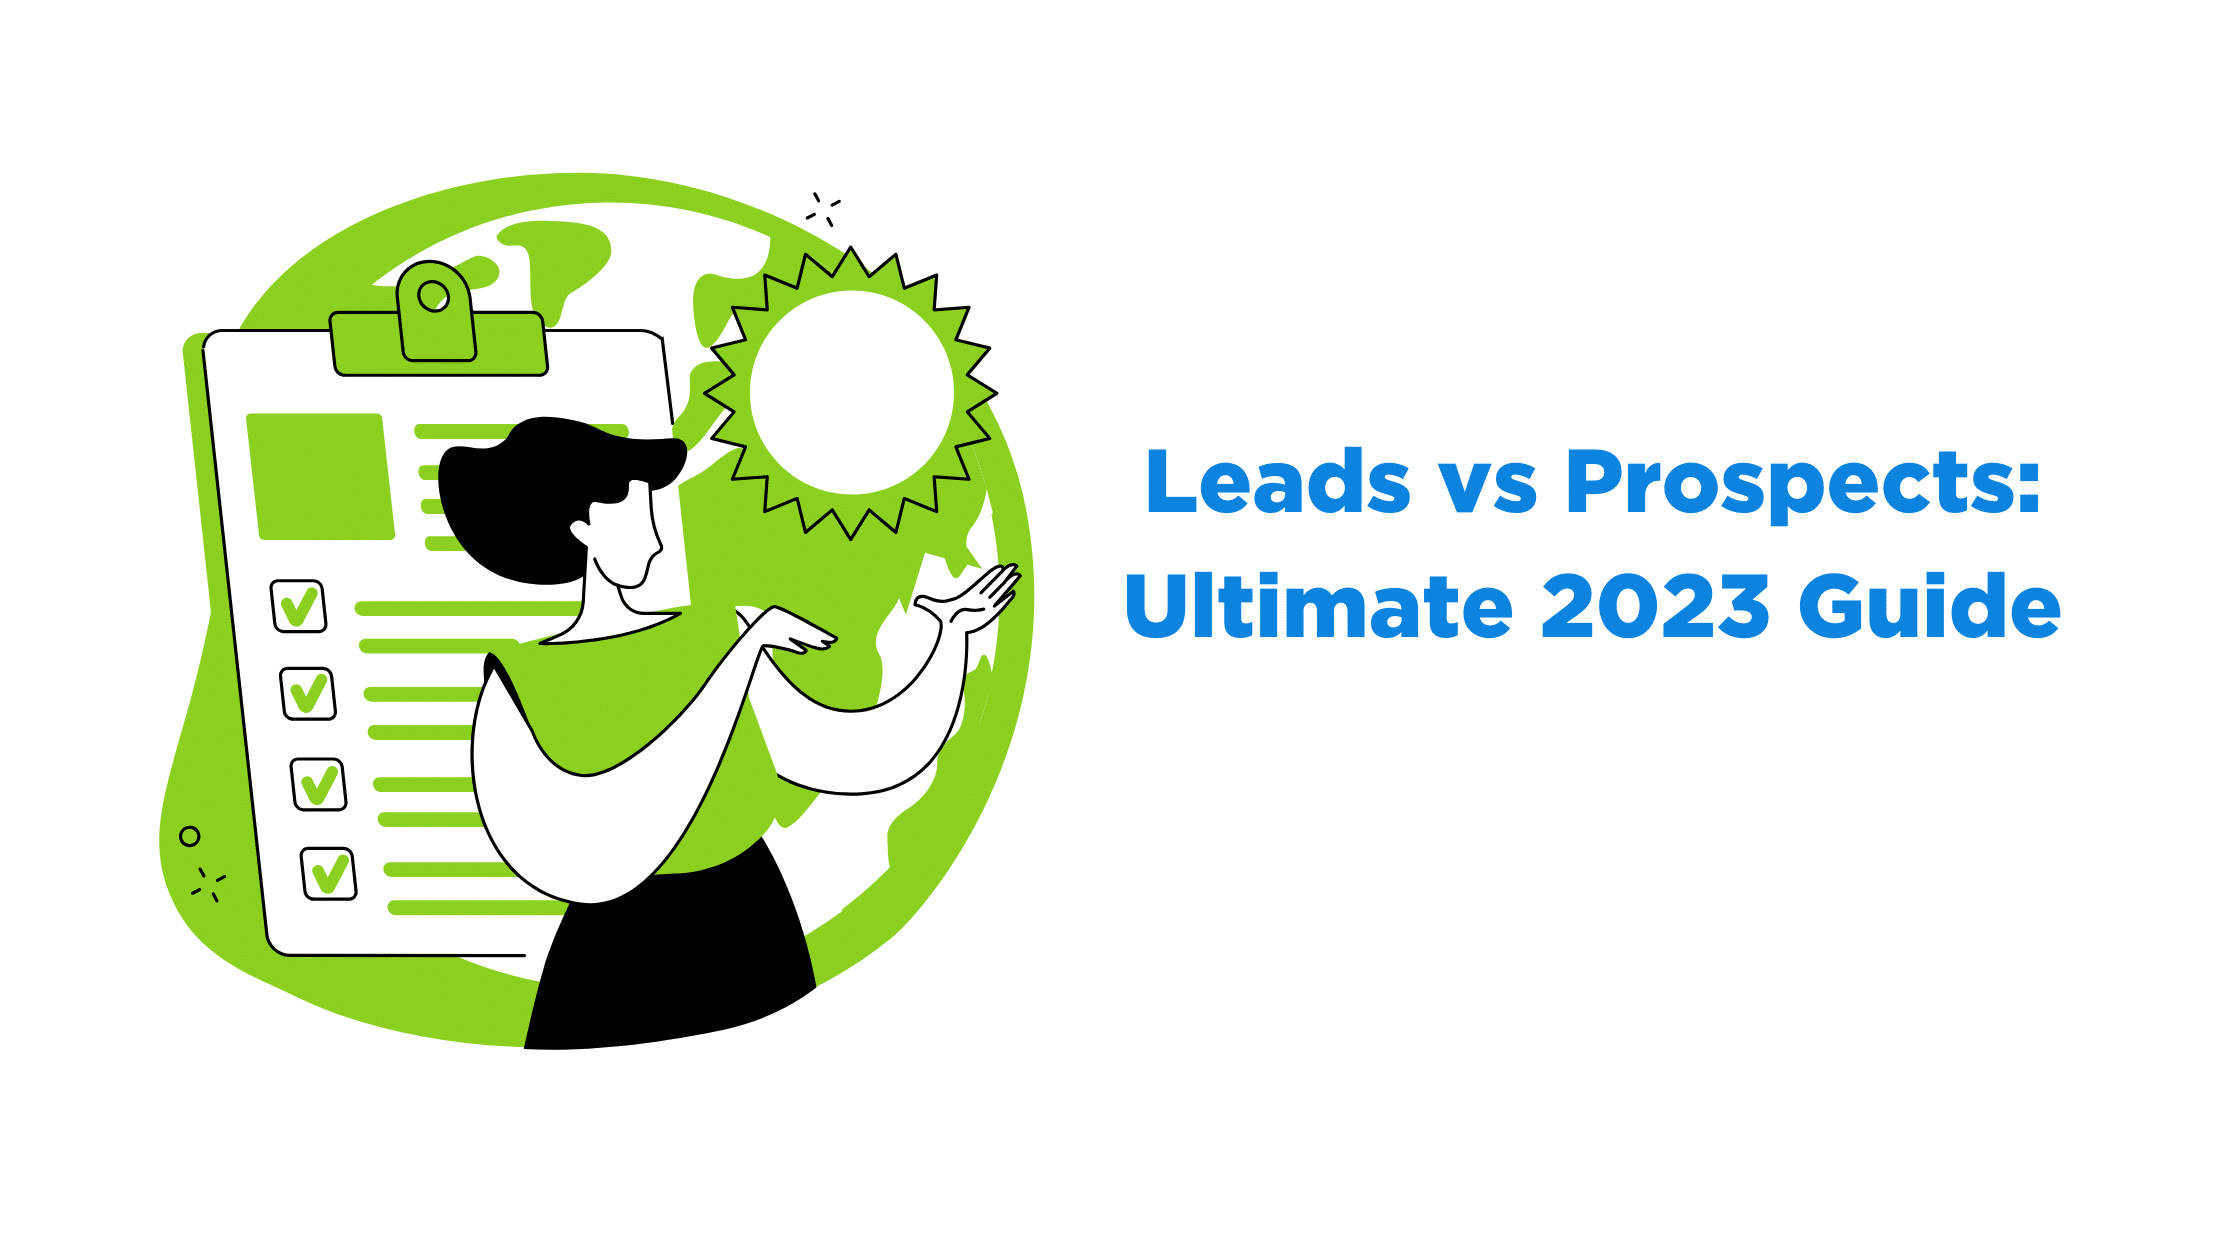 Leads vs Prospects: Ultimate 2023 Guide